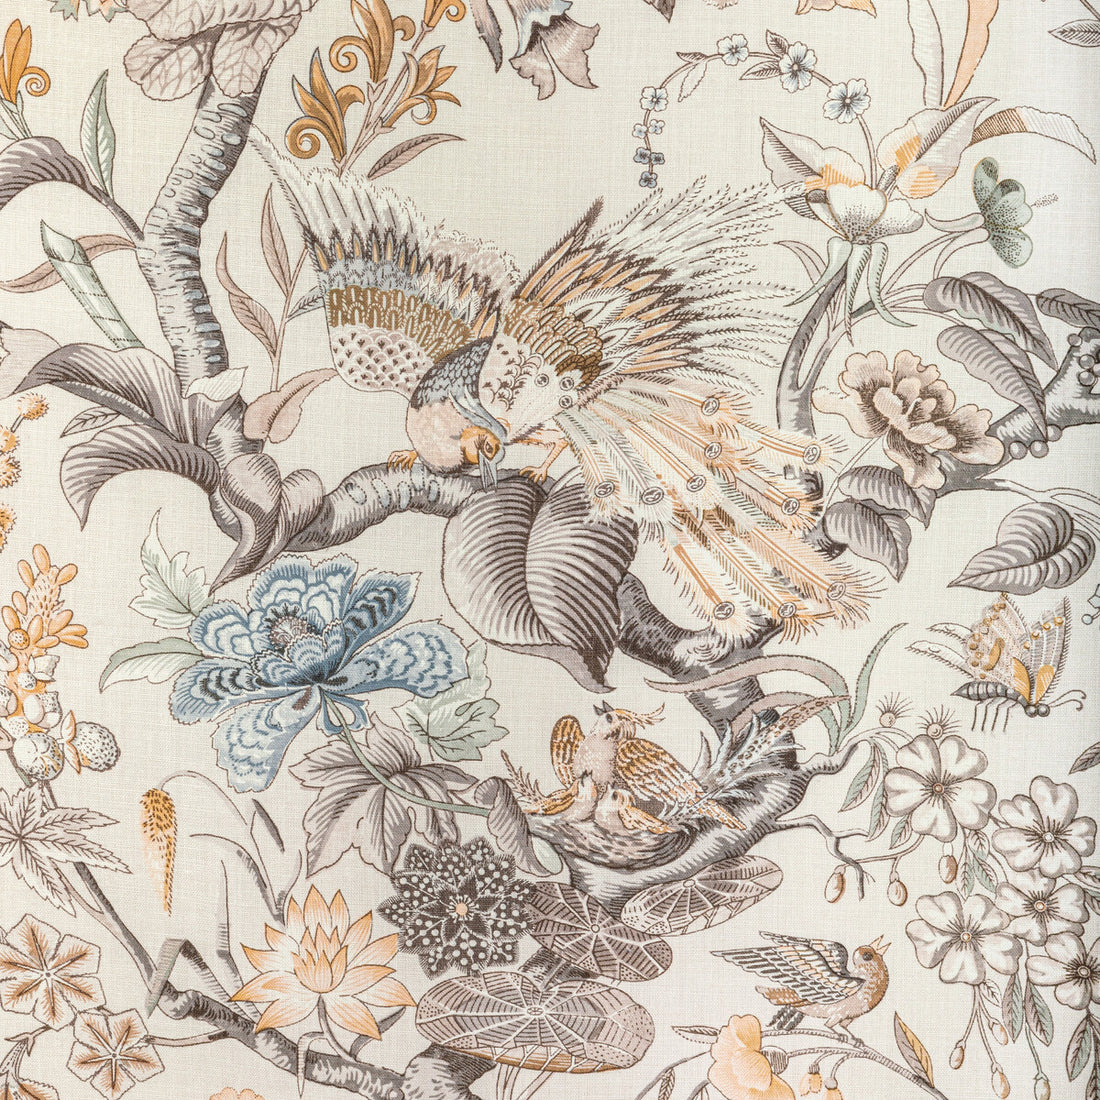 Greenfield Print fabric in stone color - pattern 2022116.1211.0 - by Lee Jofa in the Bunny Williams Arcadia collection